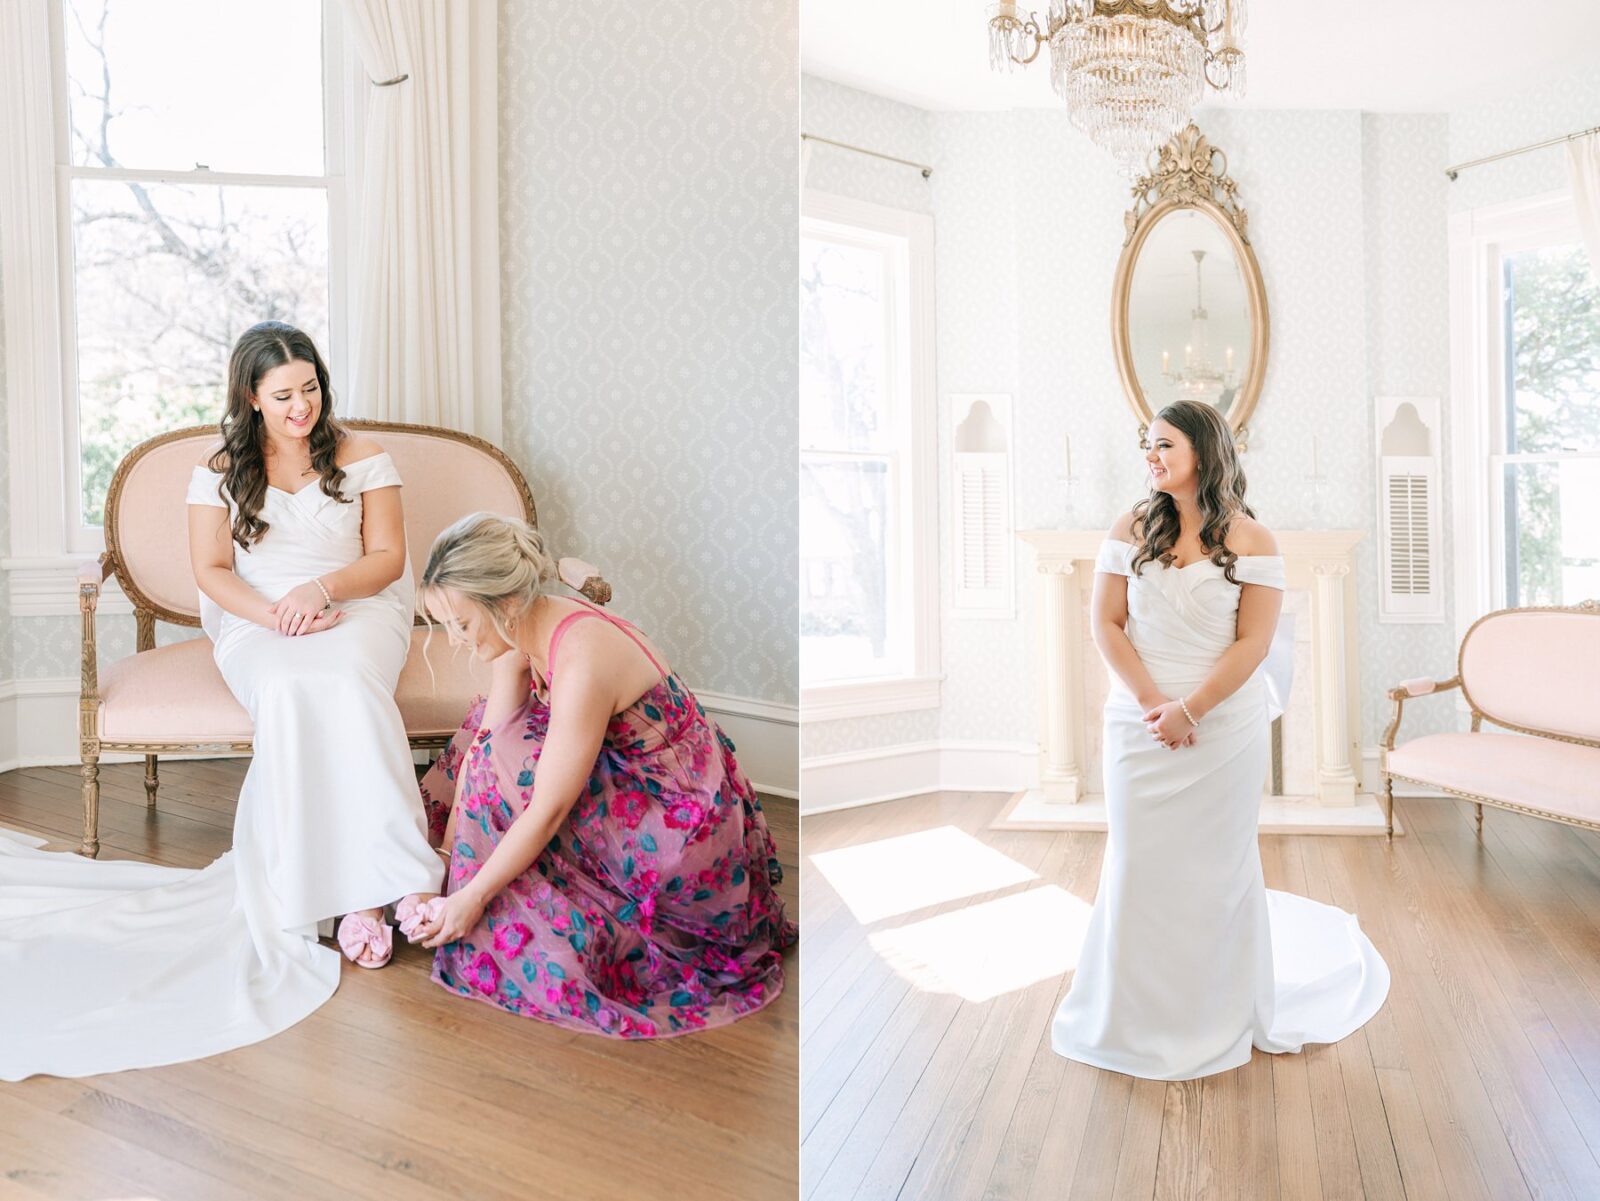 bridesmaid helping bride put on shoes, getting ready suite at woodbine mansion, historic wedding venue near austin, round rock wedding venue, wedding at Woodbine mansion in round rock texas, wedding photos by Tara Lyons Photography, planning by The event shop